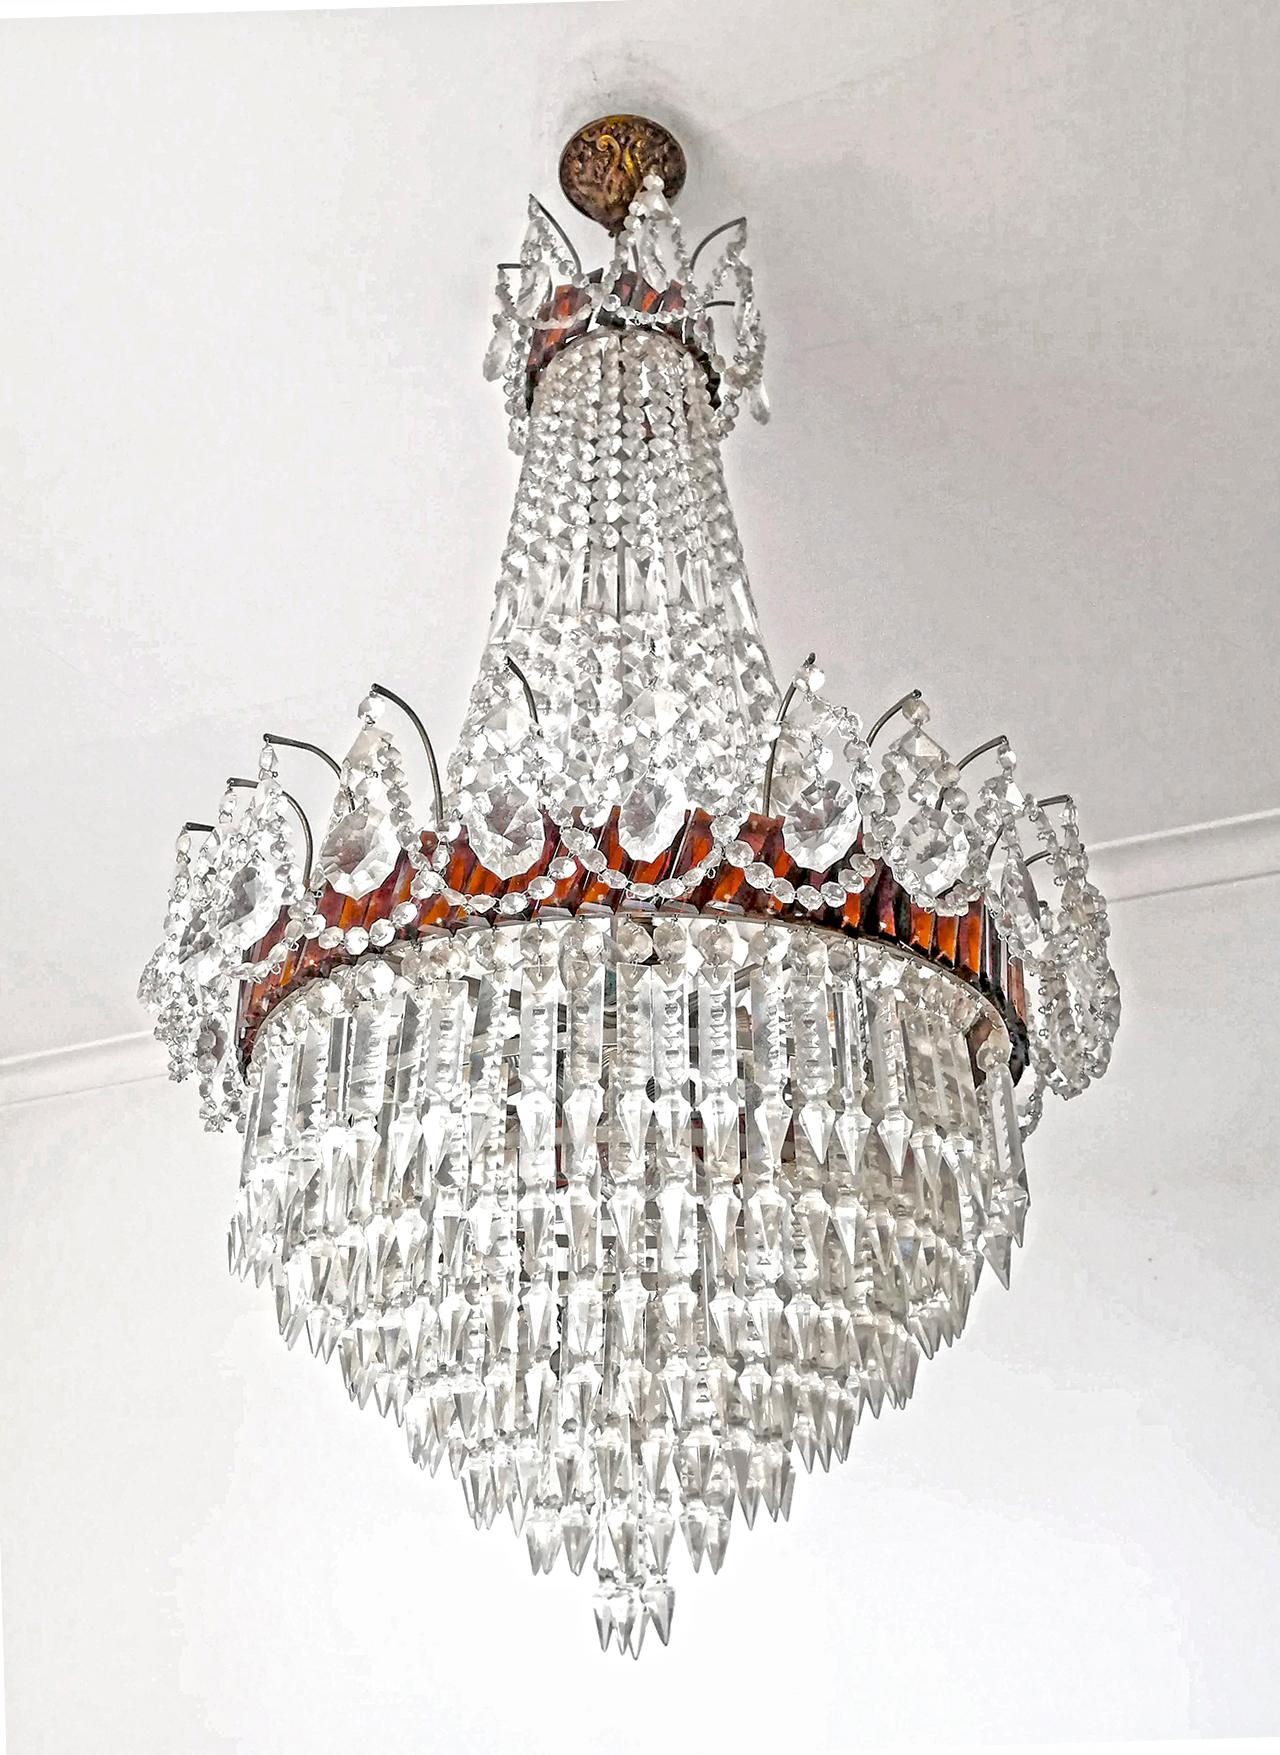 Fabulous French Empire pure crystal chandelier.
Dimensions
Height: 43.31 in. (110 cm)
Diameter: 19.69 in. (50 cm)
Weight: 44 lb/ 20 Kg
5-light bulbs E14, good working condition
Assembly required. Bulbs not included.